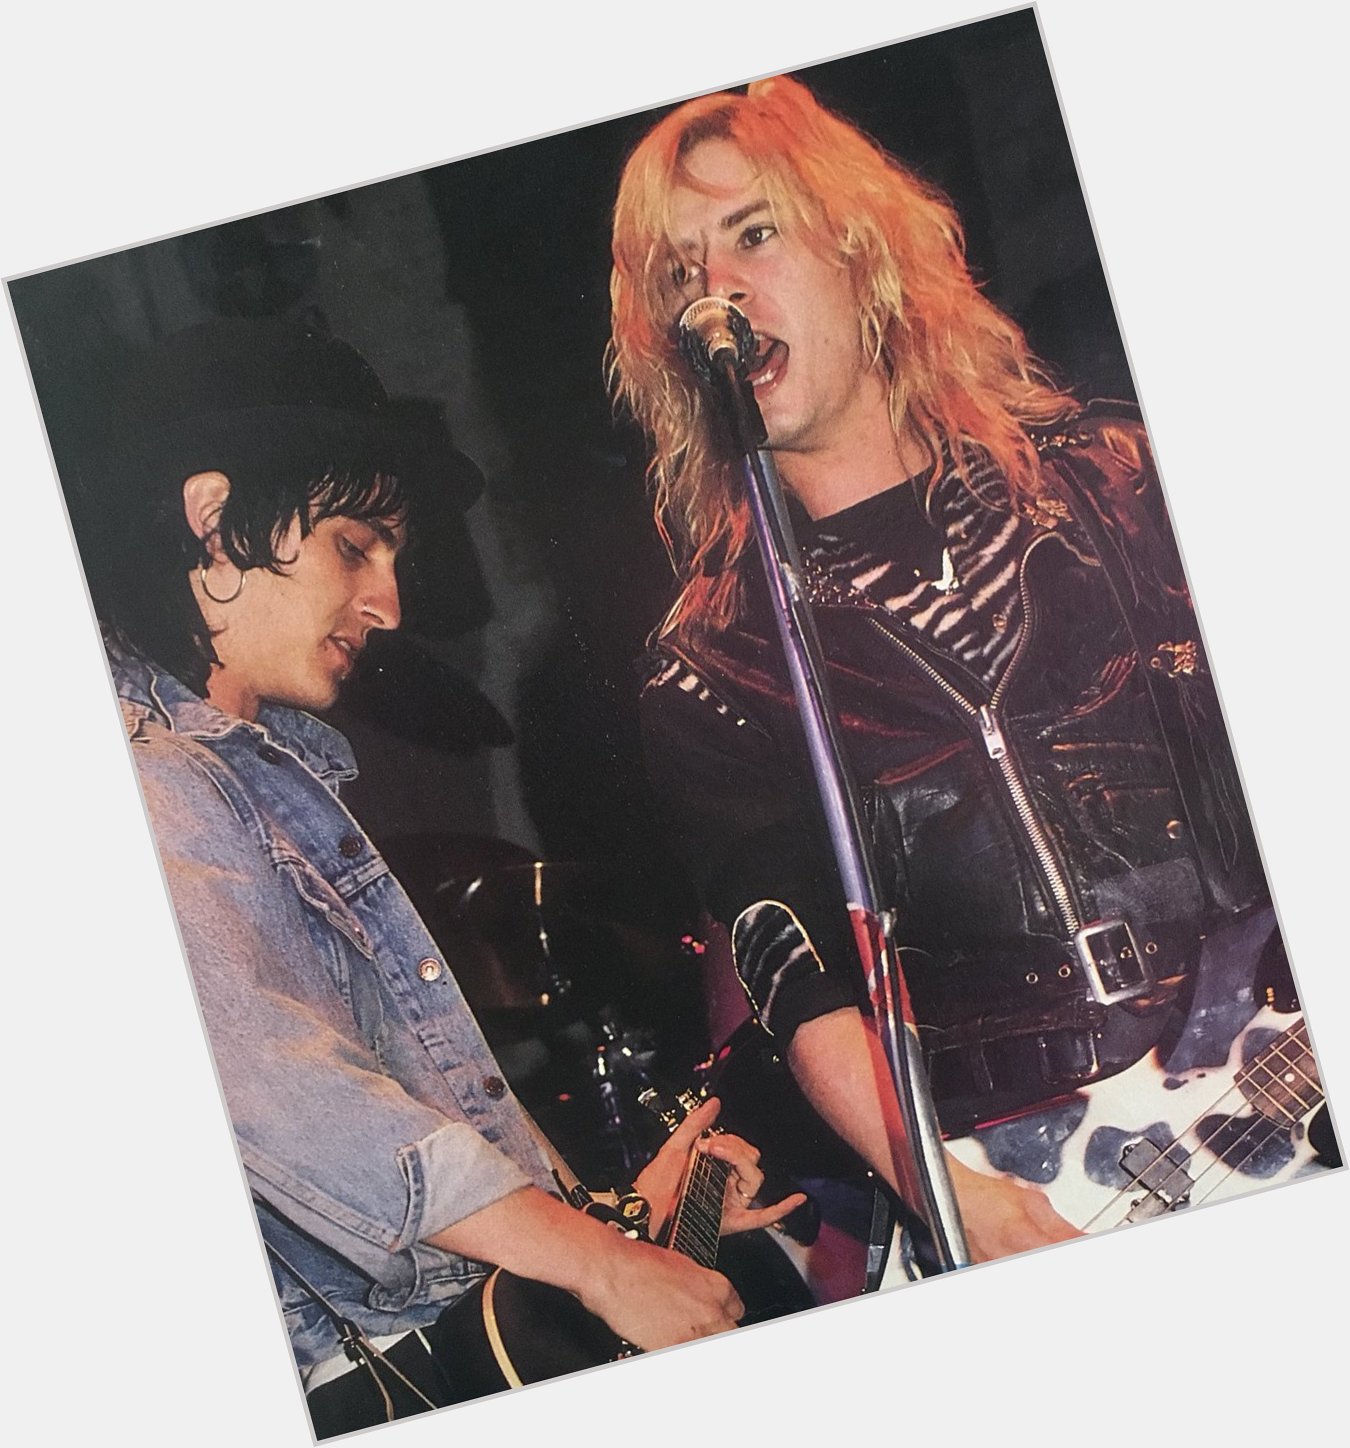 Happy 58th birthday to duff mckagan, born on this day in 1964 <3 